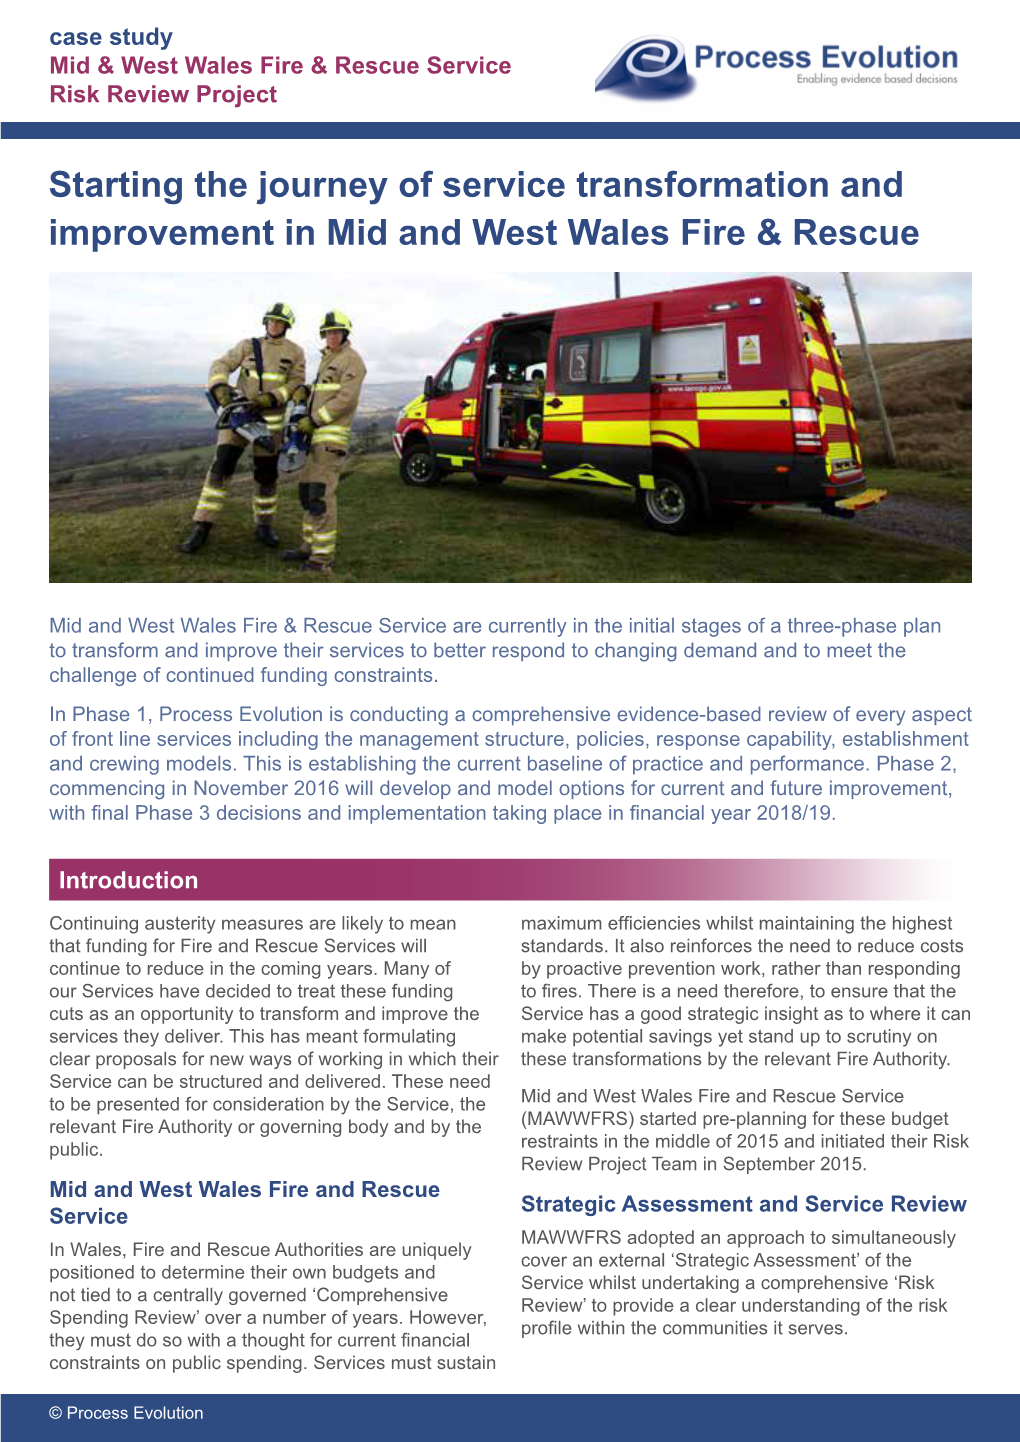 Starting the Journey of Service Transformation and Improvement in Mid and West Wales Fire & Rescue